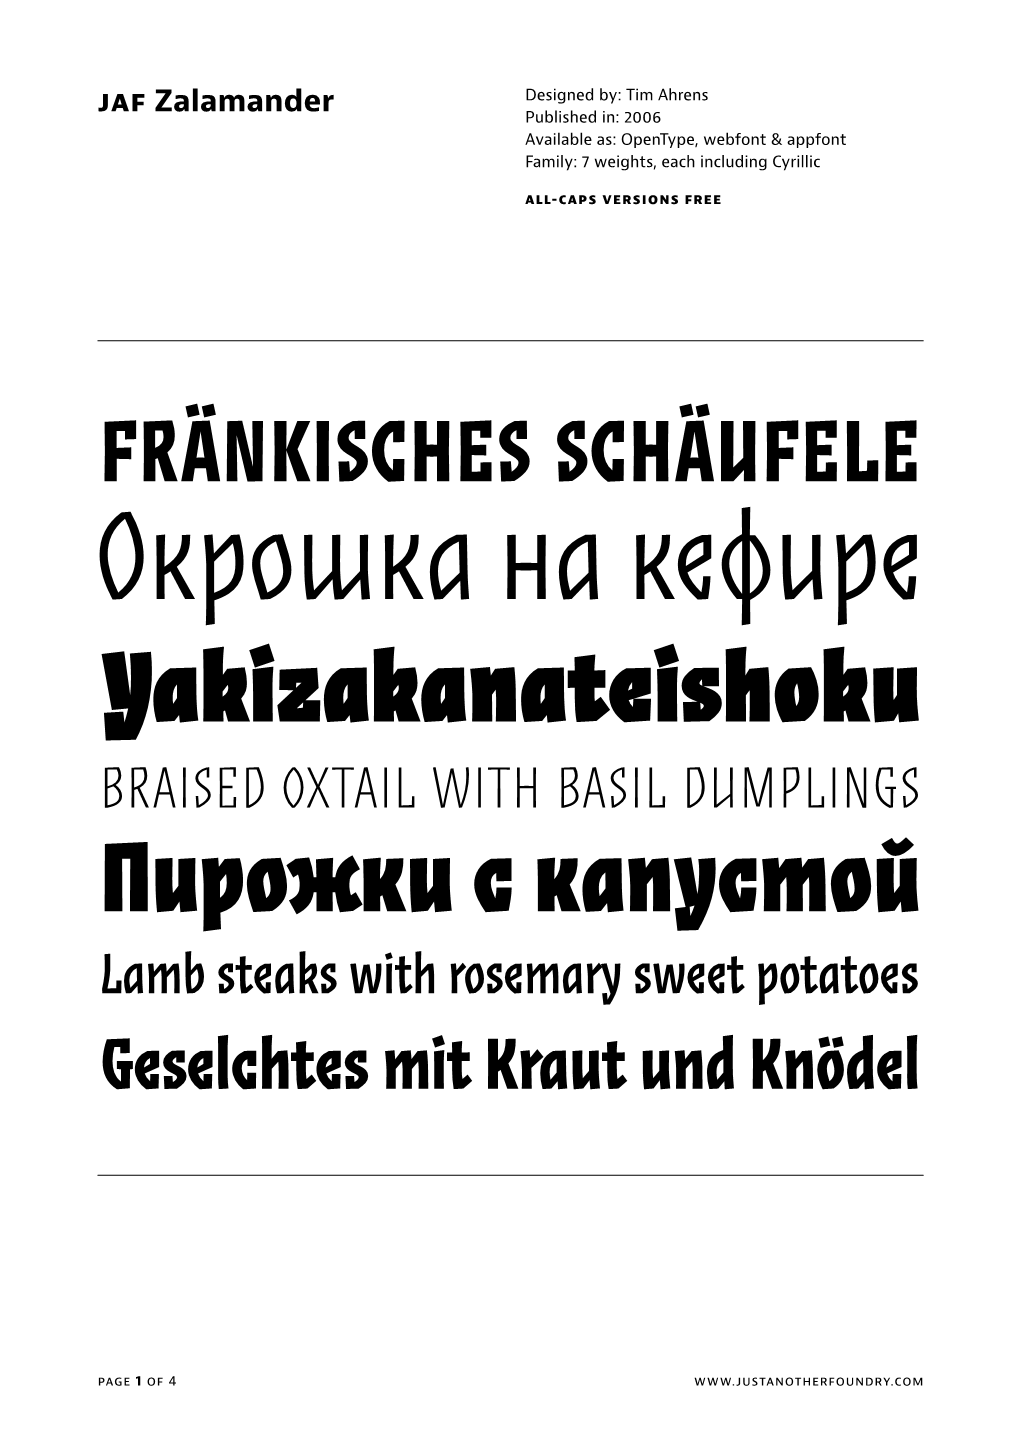 Jaf Zalamander Published In: 2006 Available As: Opentype, Webfont & Appfont Family: 7 Weights, Each Including Cyrillic